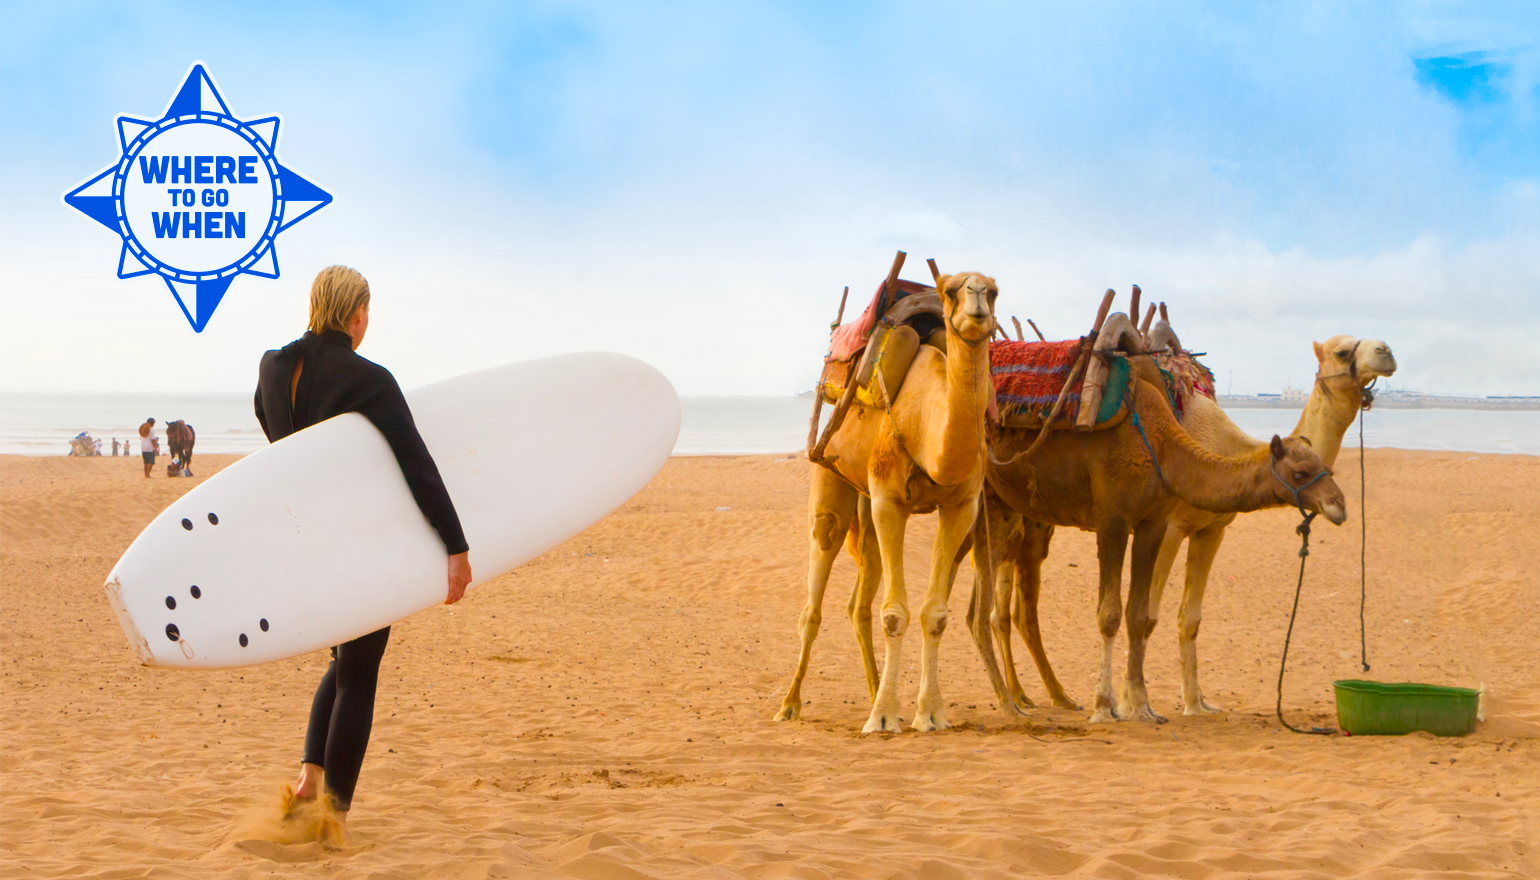 Female surfer and camels at the beach of Essaouira, Morocco, Africa.